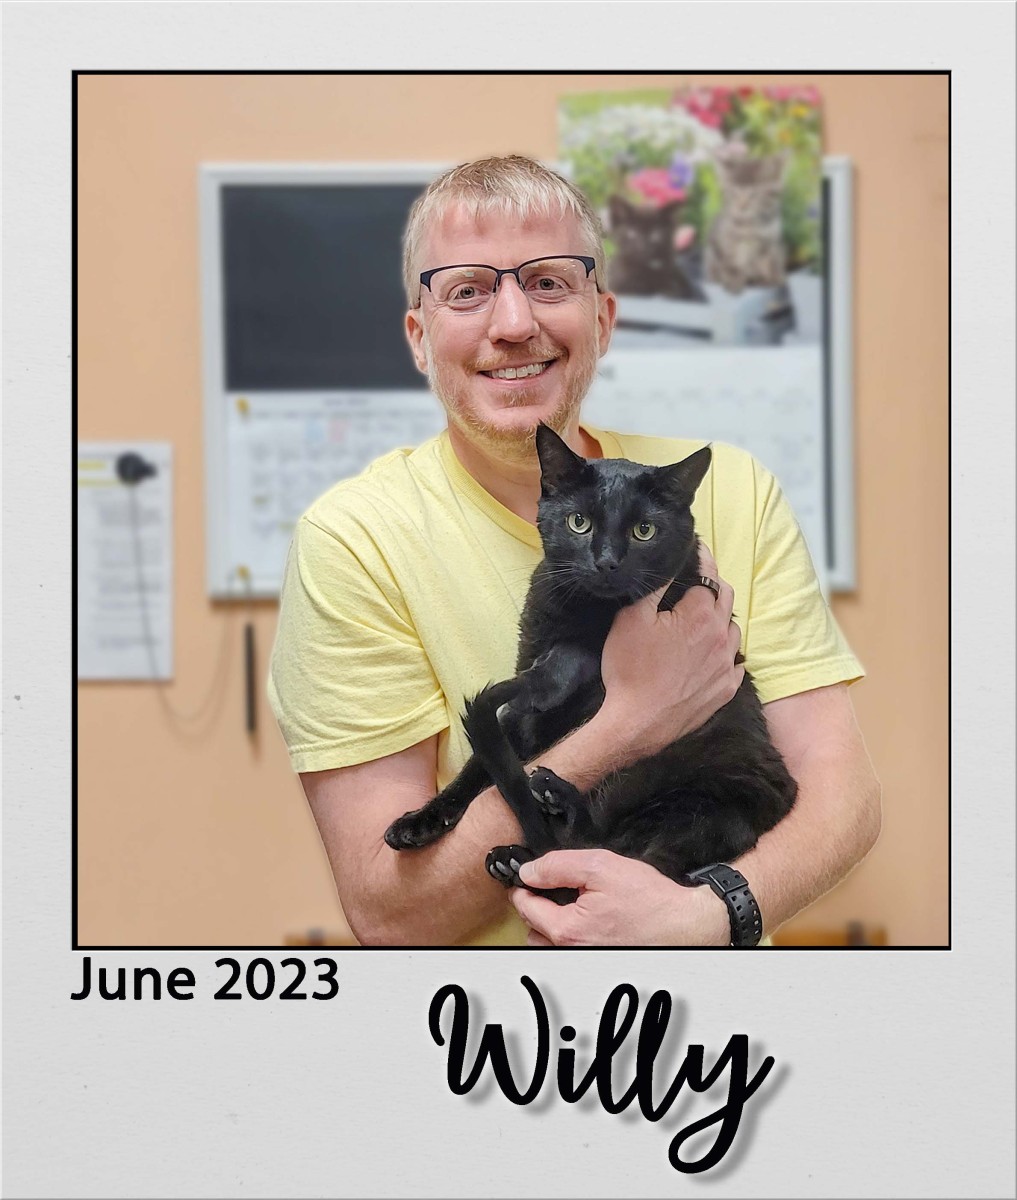 Adopt-Willy-June2023